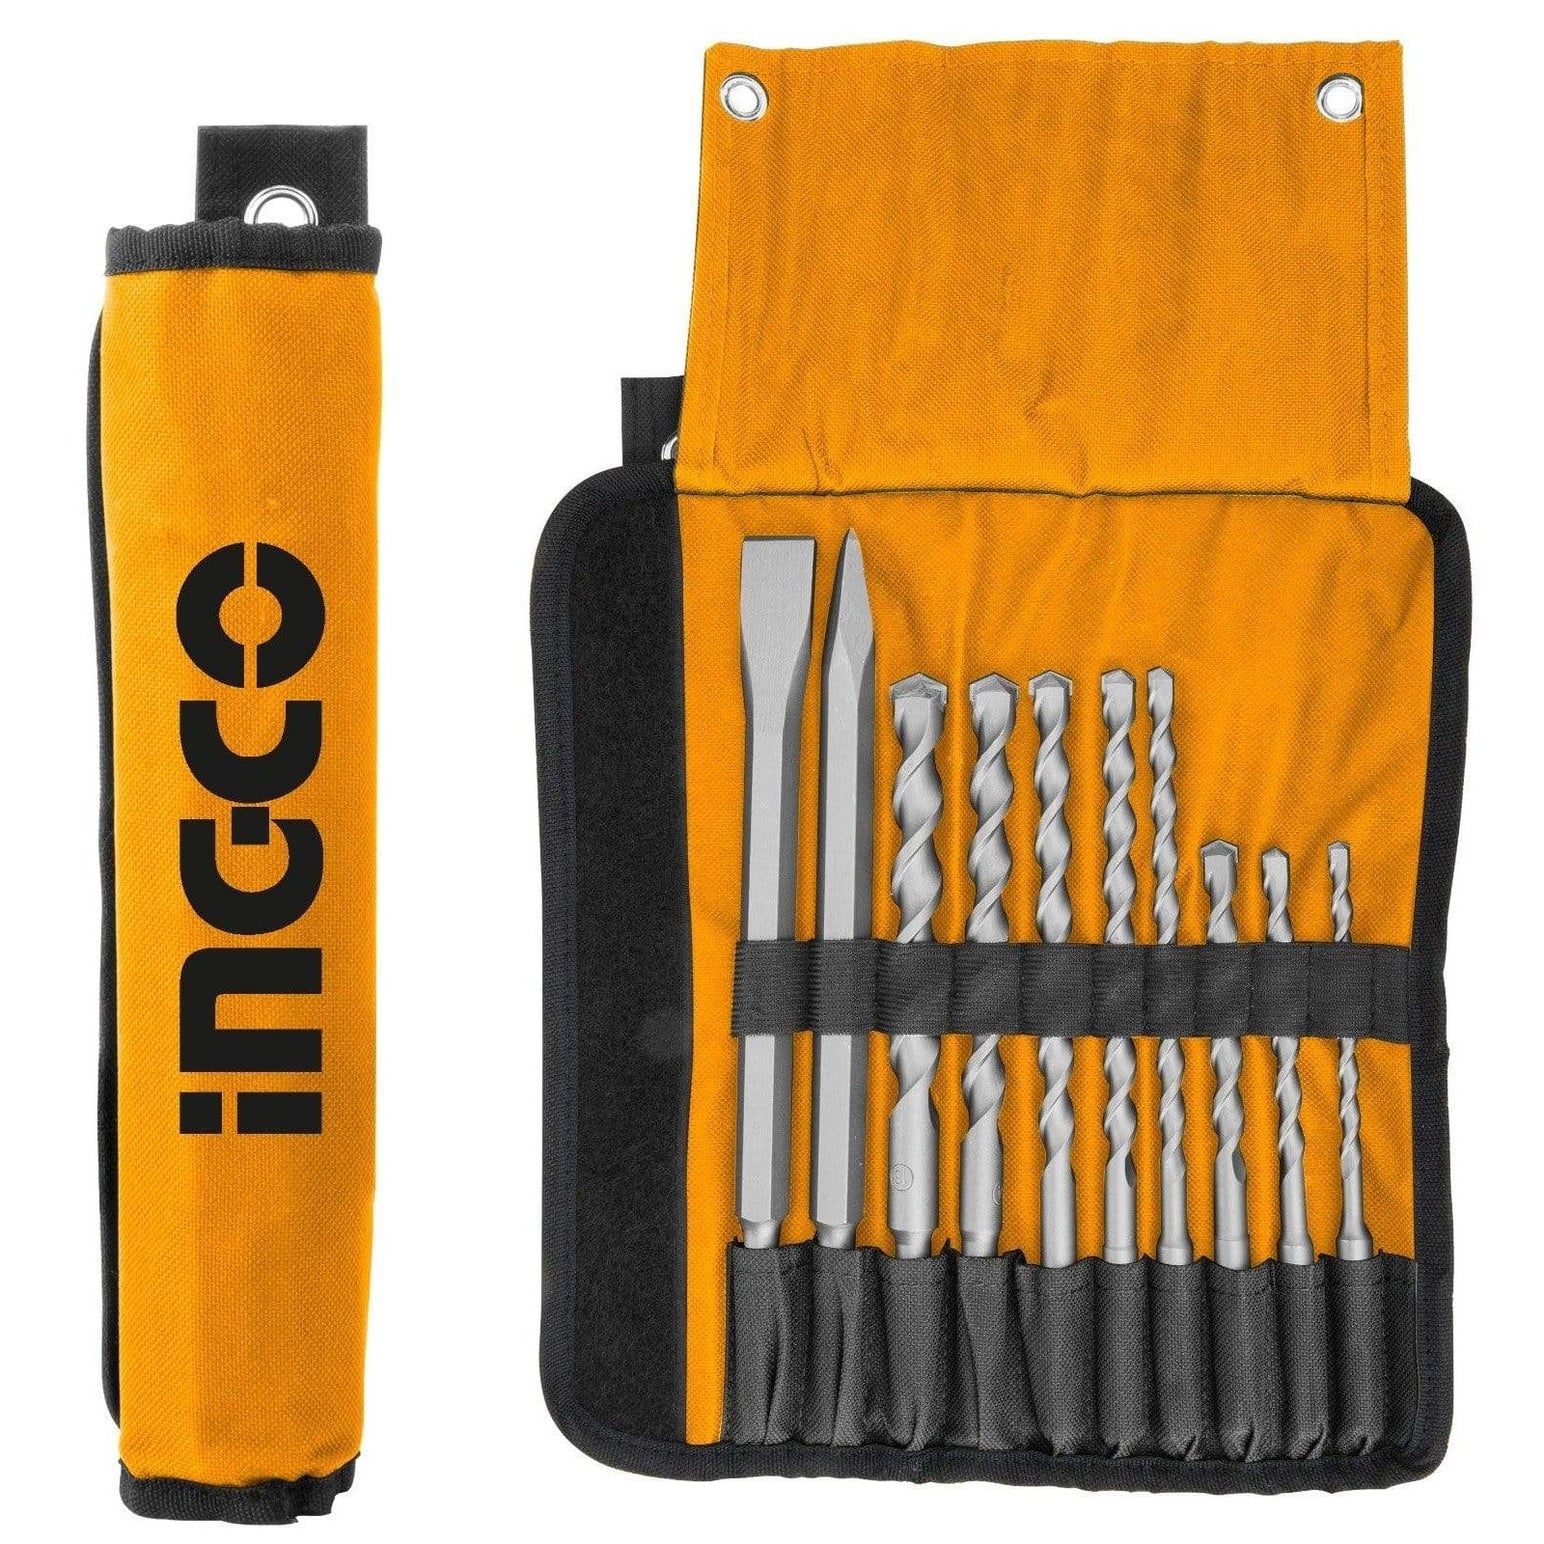 Ingco 10 Pieces Hammer Drill Bits And Chisels Set - AKD2101 | Supply Master | Accra, Ghana Tools Building Steel Engineering Hardware tool